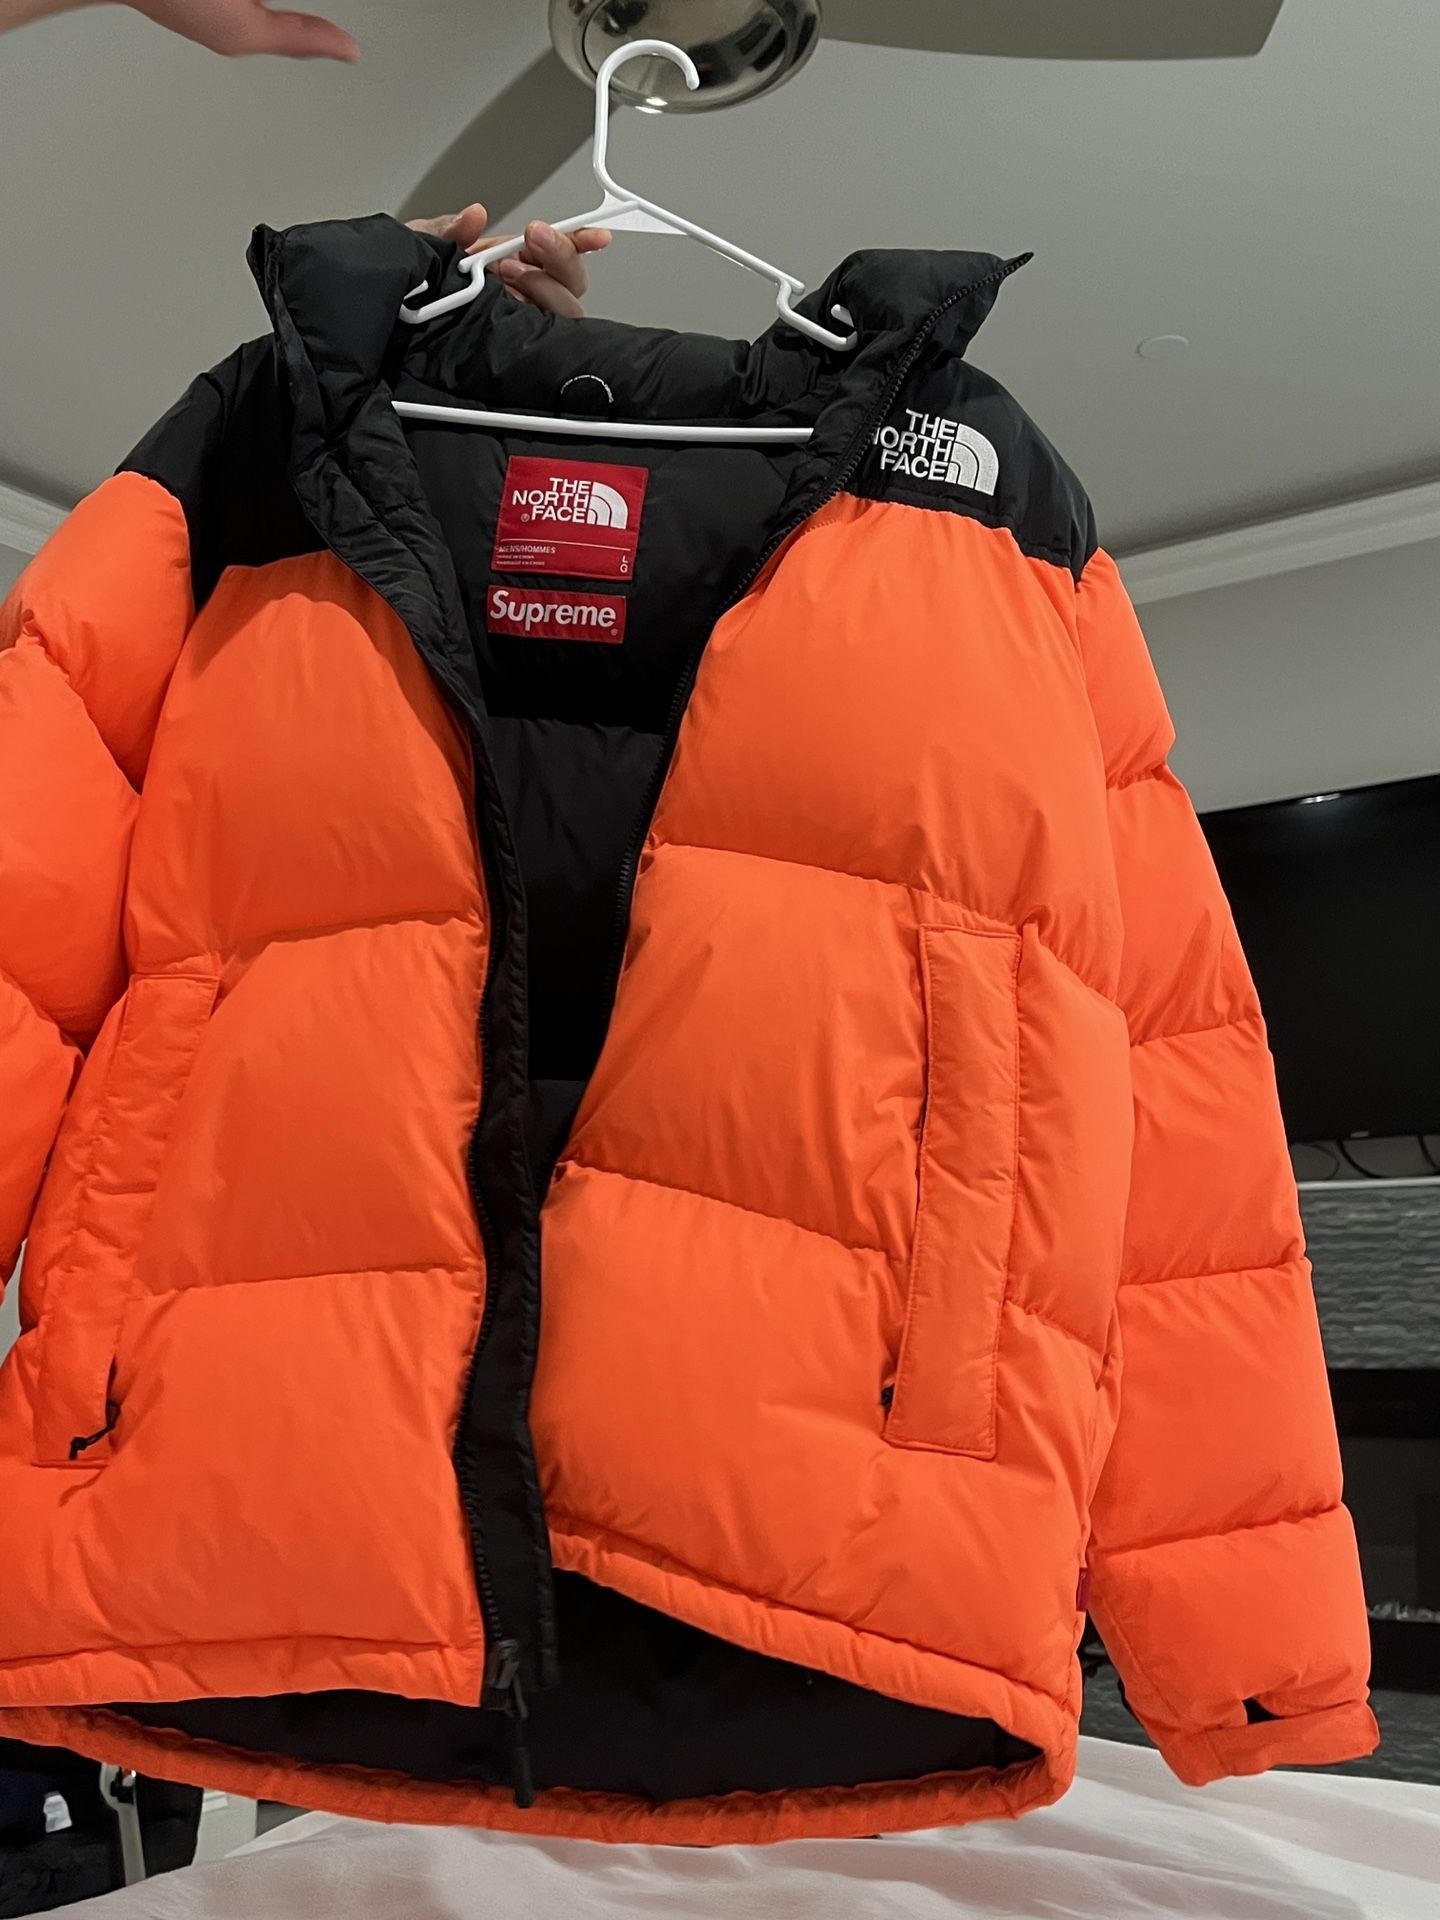 North face Supreme Puffer Jacket 